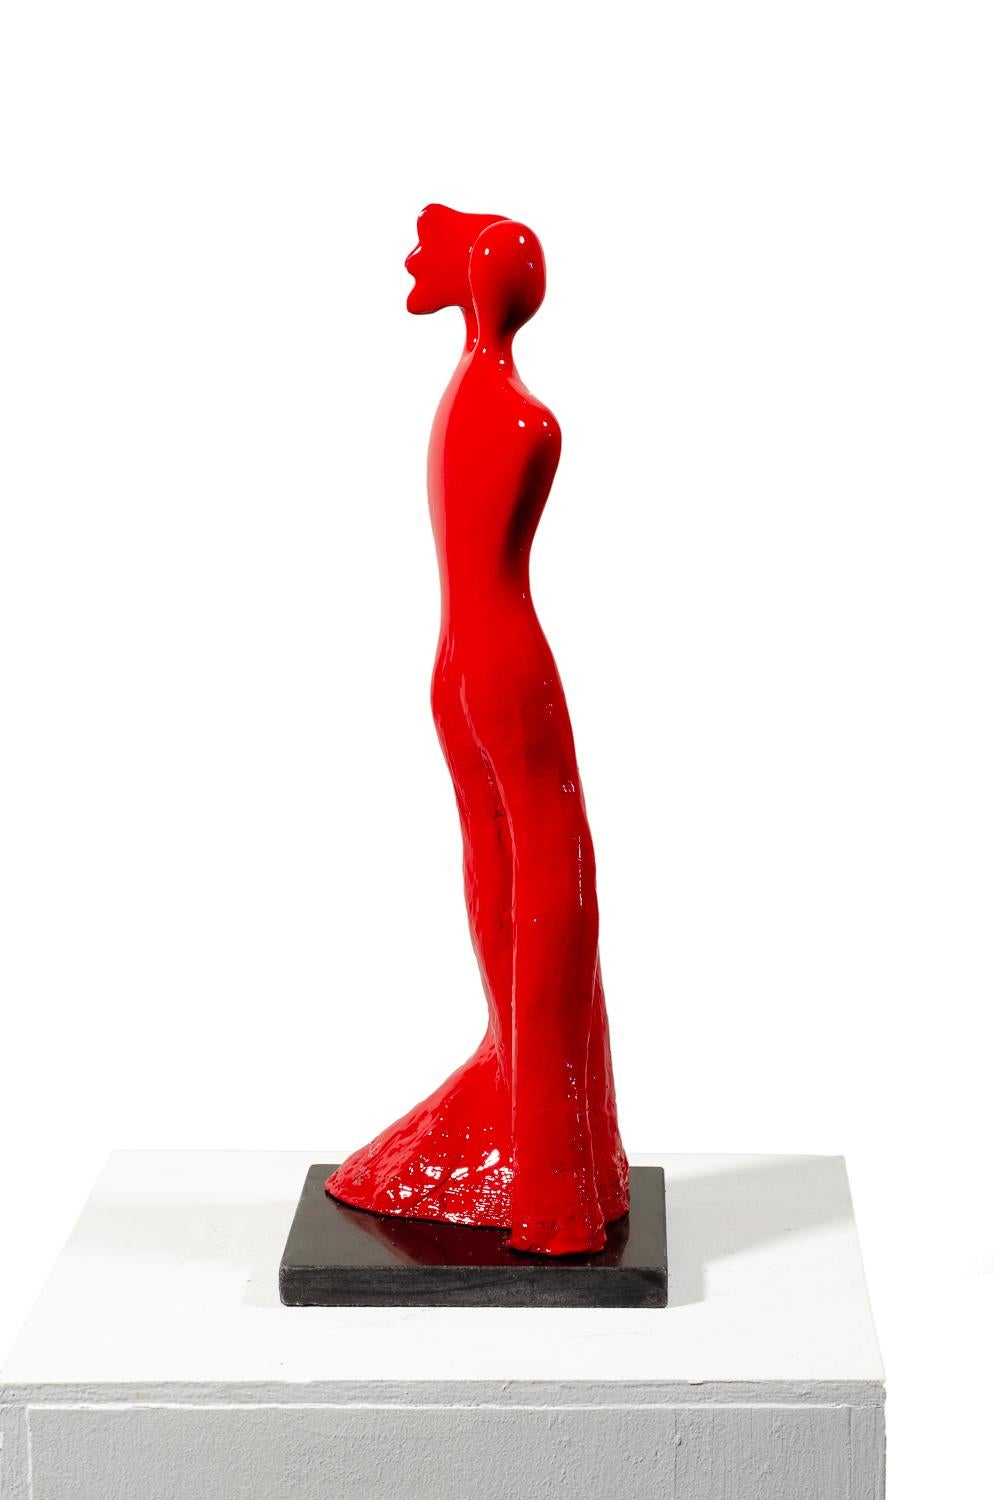 Soul Mates #1 (in red) When in love, their souls and bodies fuse into just one. - Gold Figurative Sculpture by Beatriz Gerenstein